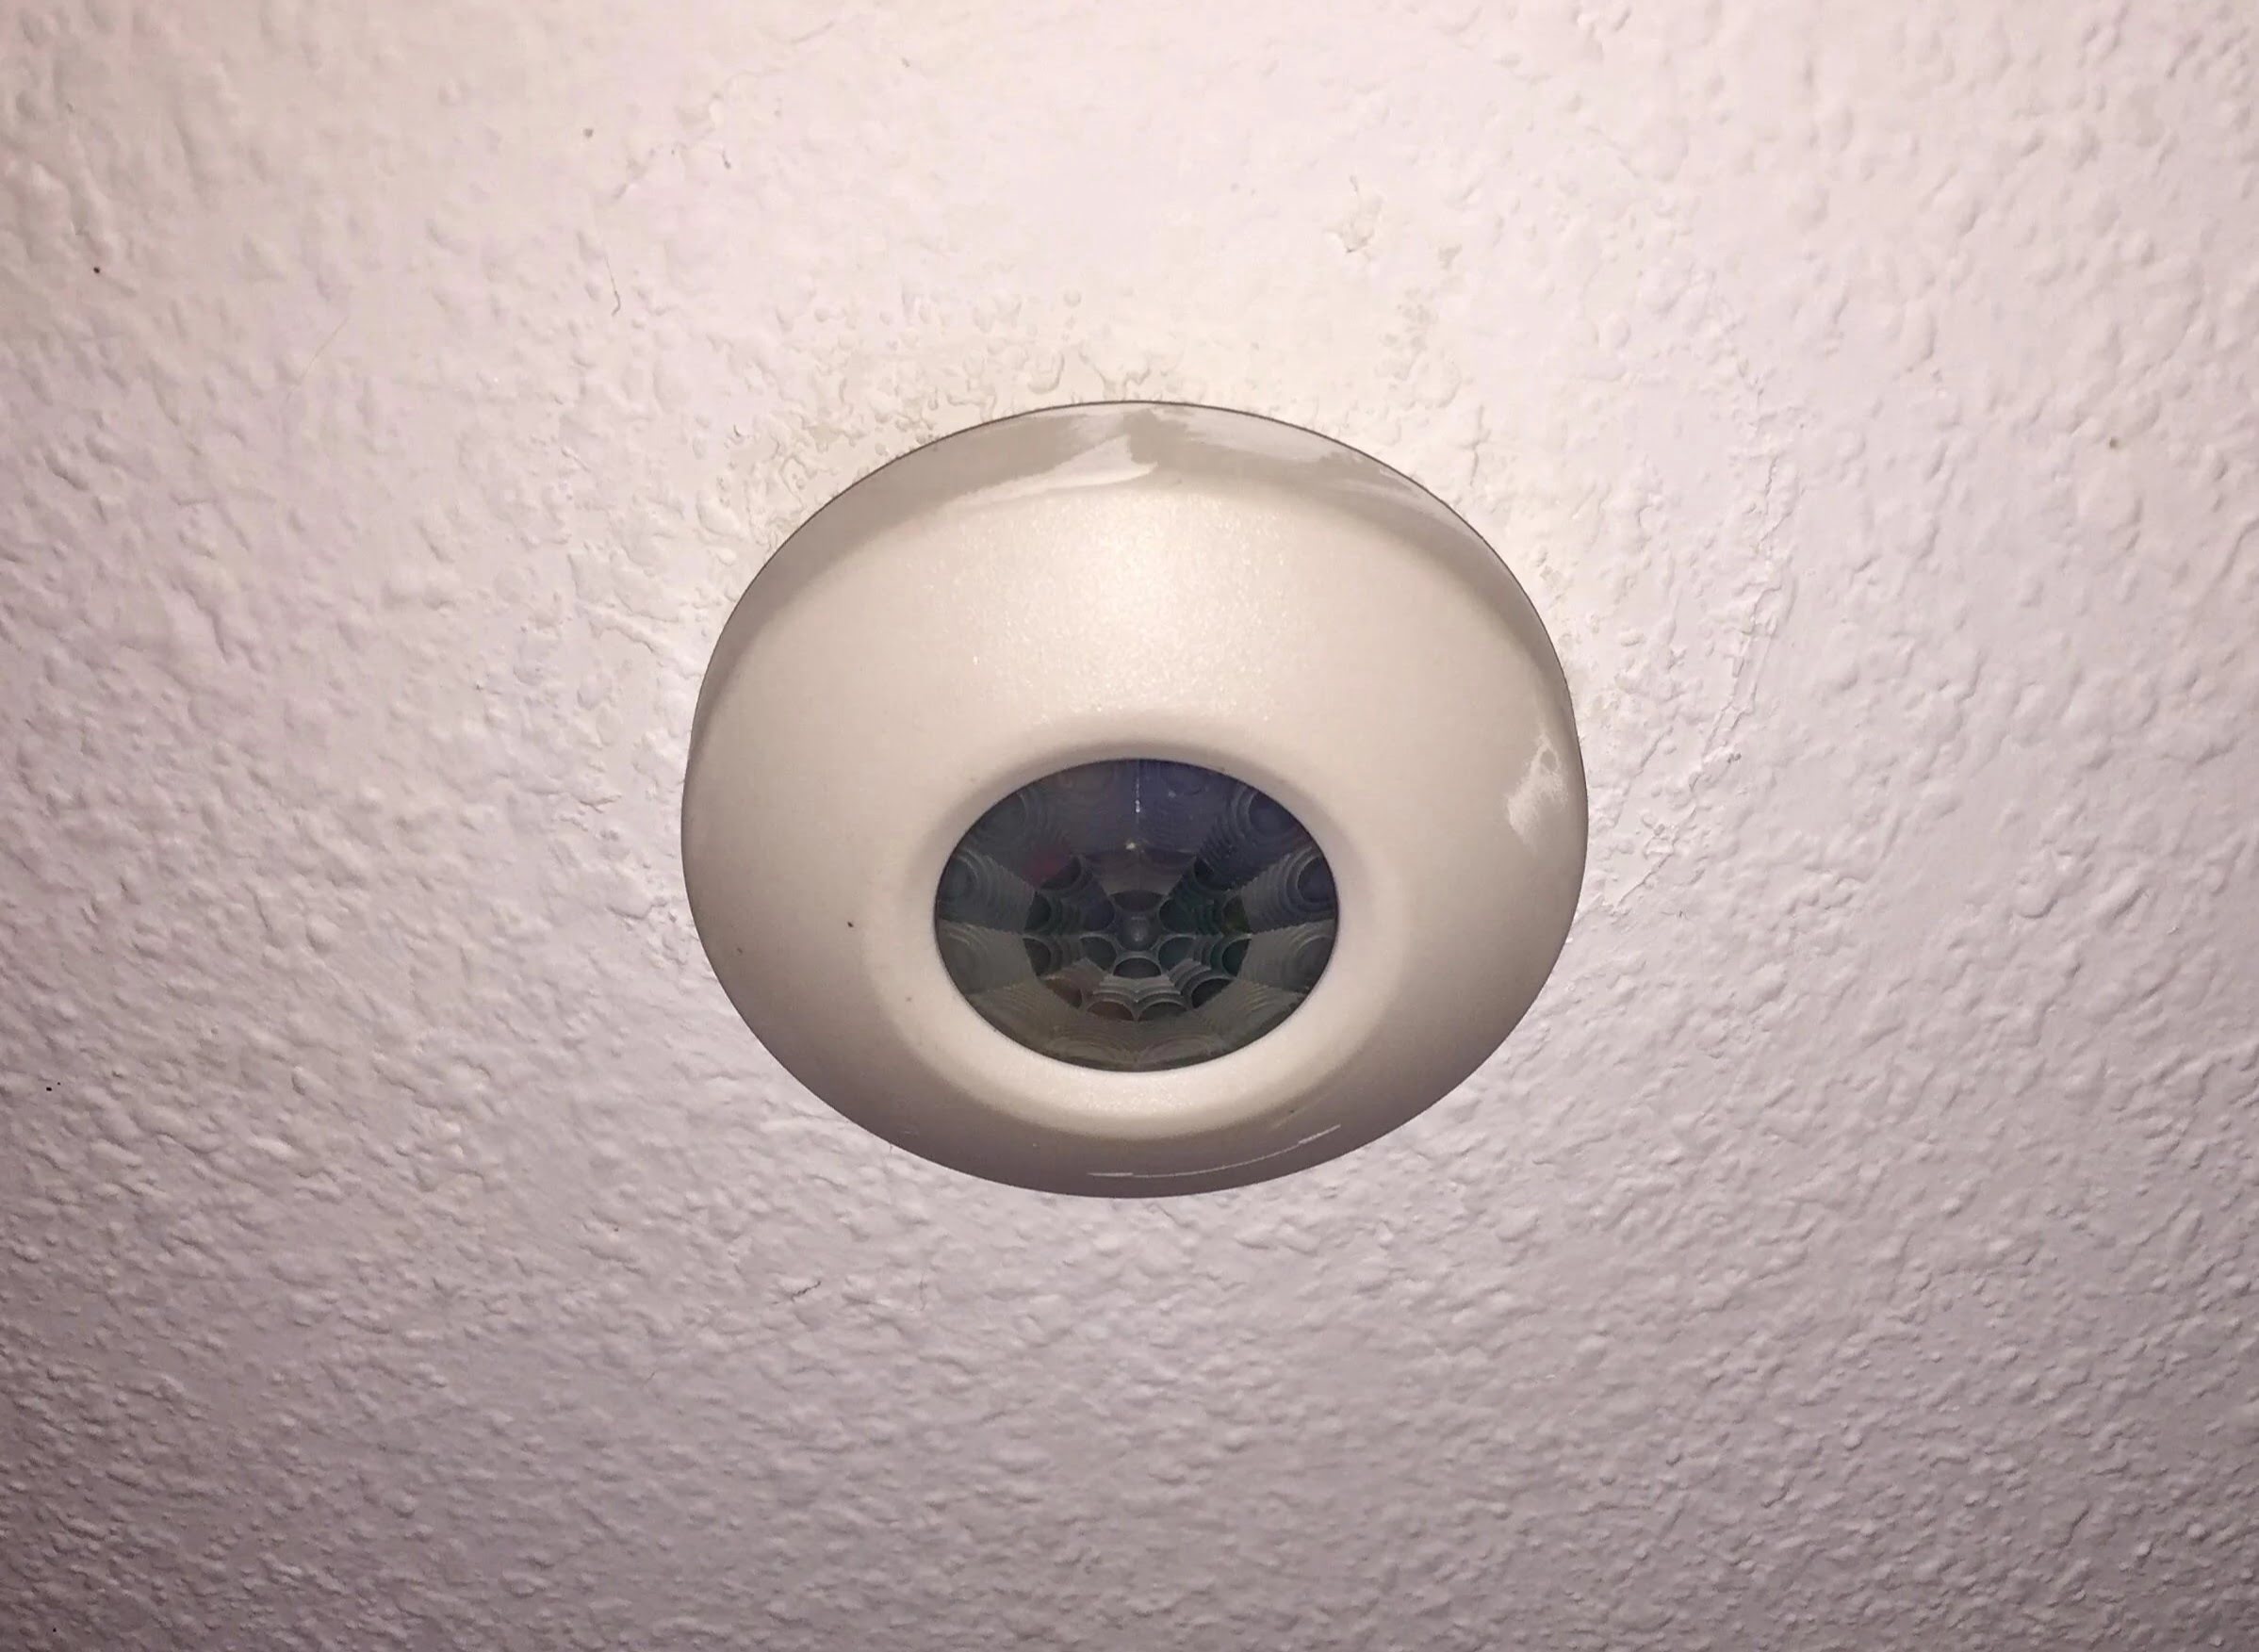 What Is The Purpose Of A Ceiling-Mounted Motion Detector?